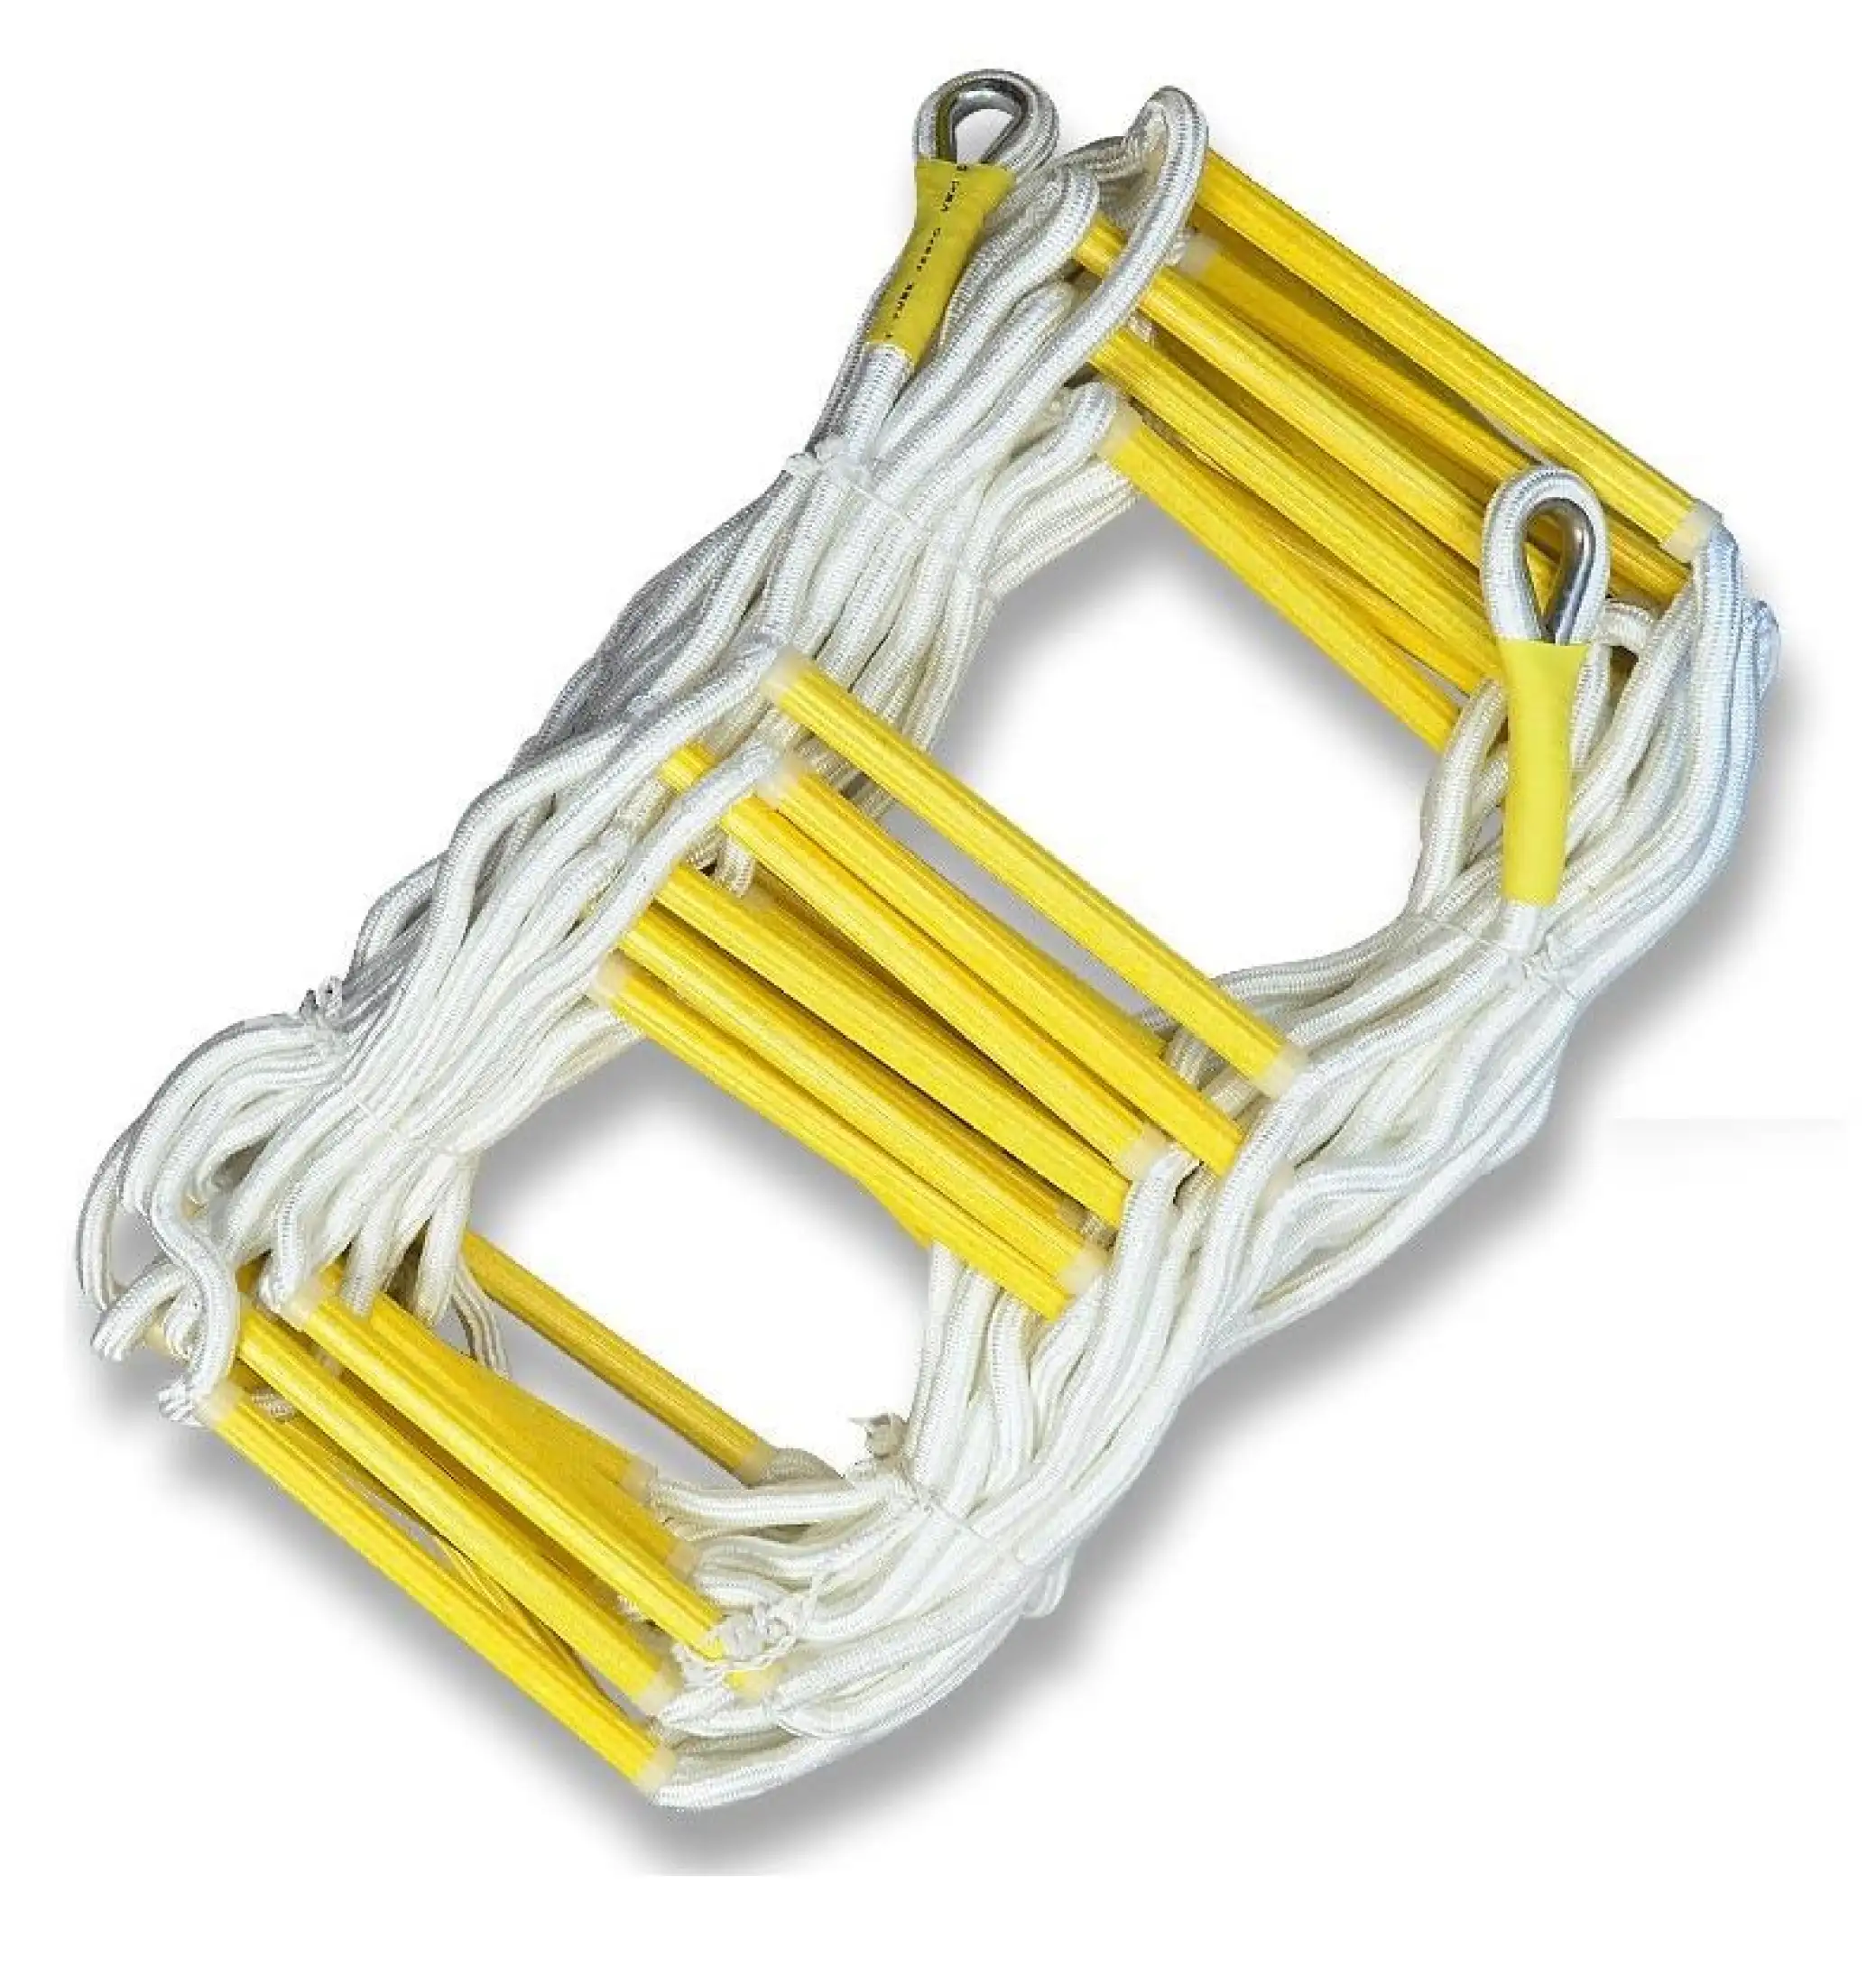 soft safety ladder for children and adults Emergency escape ladder escape rope ladder with hook carabiner escape from window and balcony